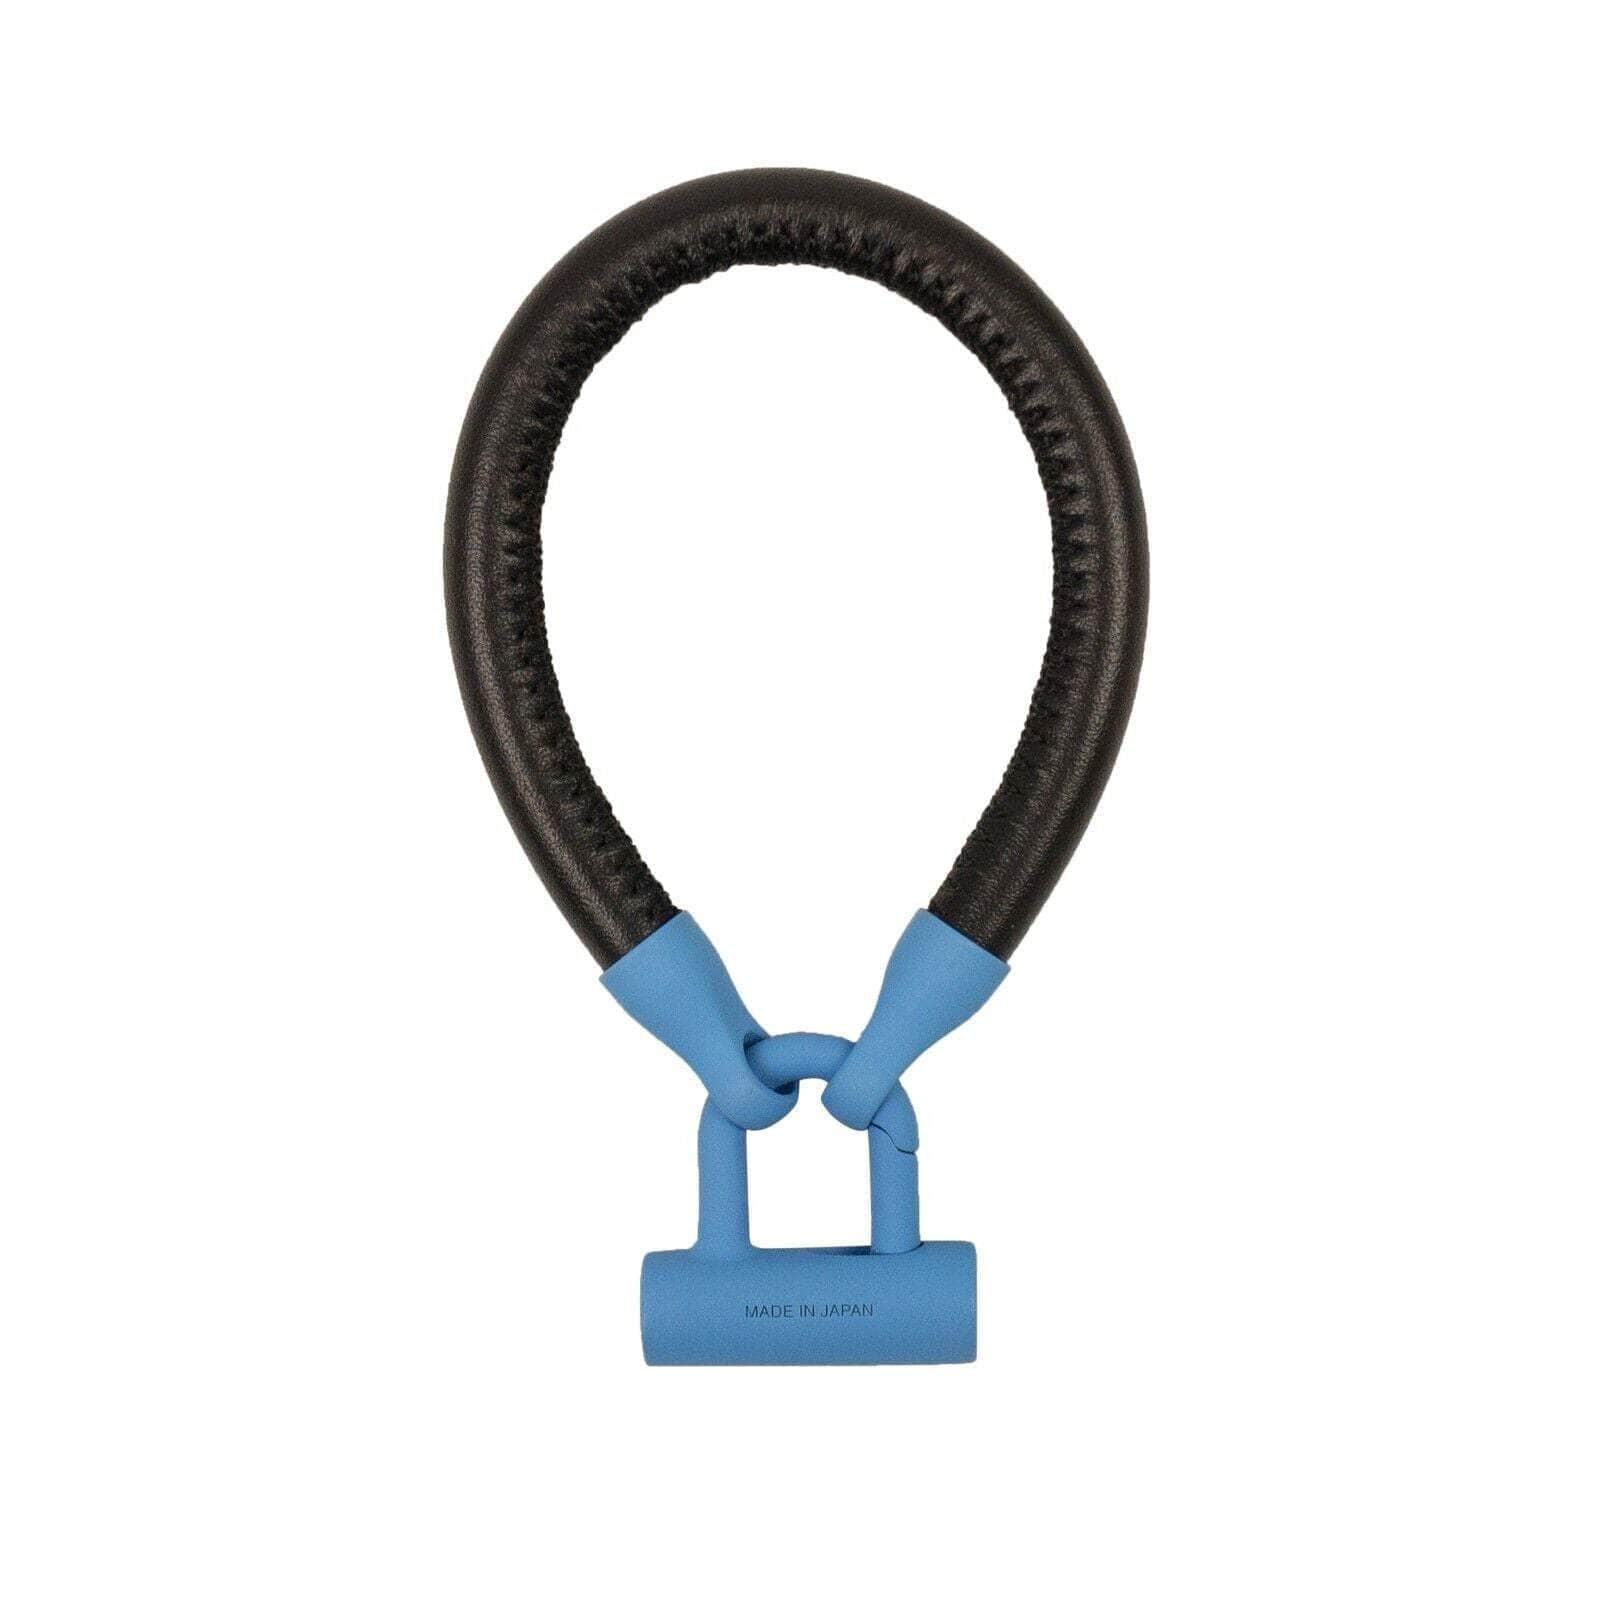 Ambush 250-500, ambush, channelenable-all, chicmi, couponcollection, gender-mens, gender-womens, main-accessories, mens-shoes, shop375, size-2, unisex-jewelry 2 Blue And Black Bike Lock Leather Bracelet 95-AMB-3046/2 95-AMB-3046/2